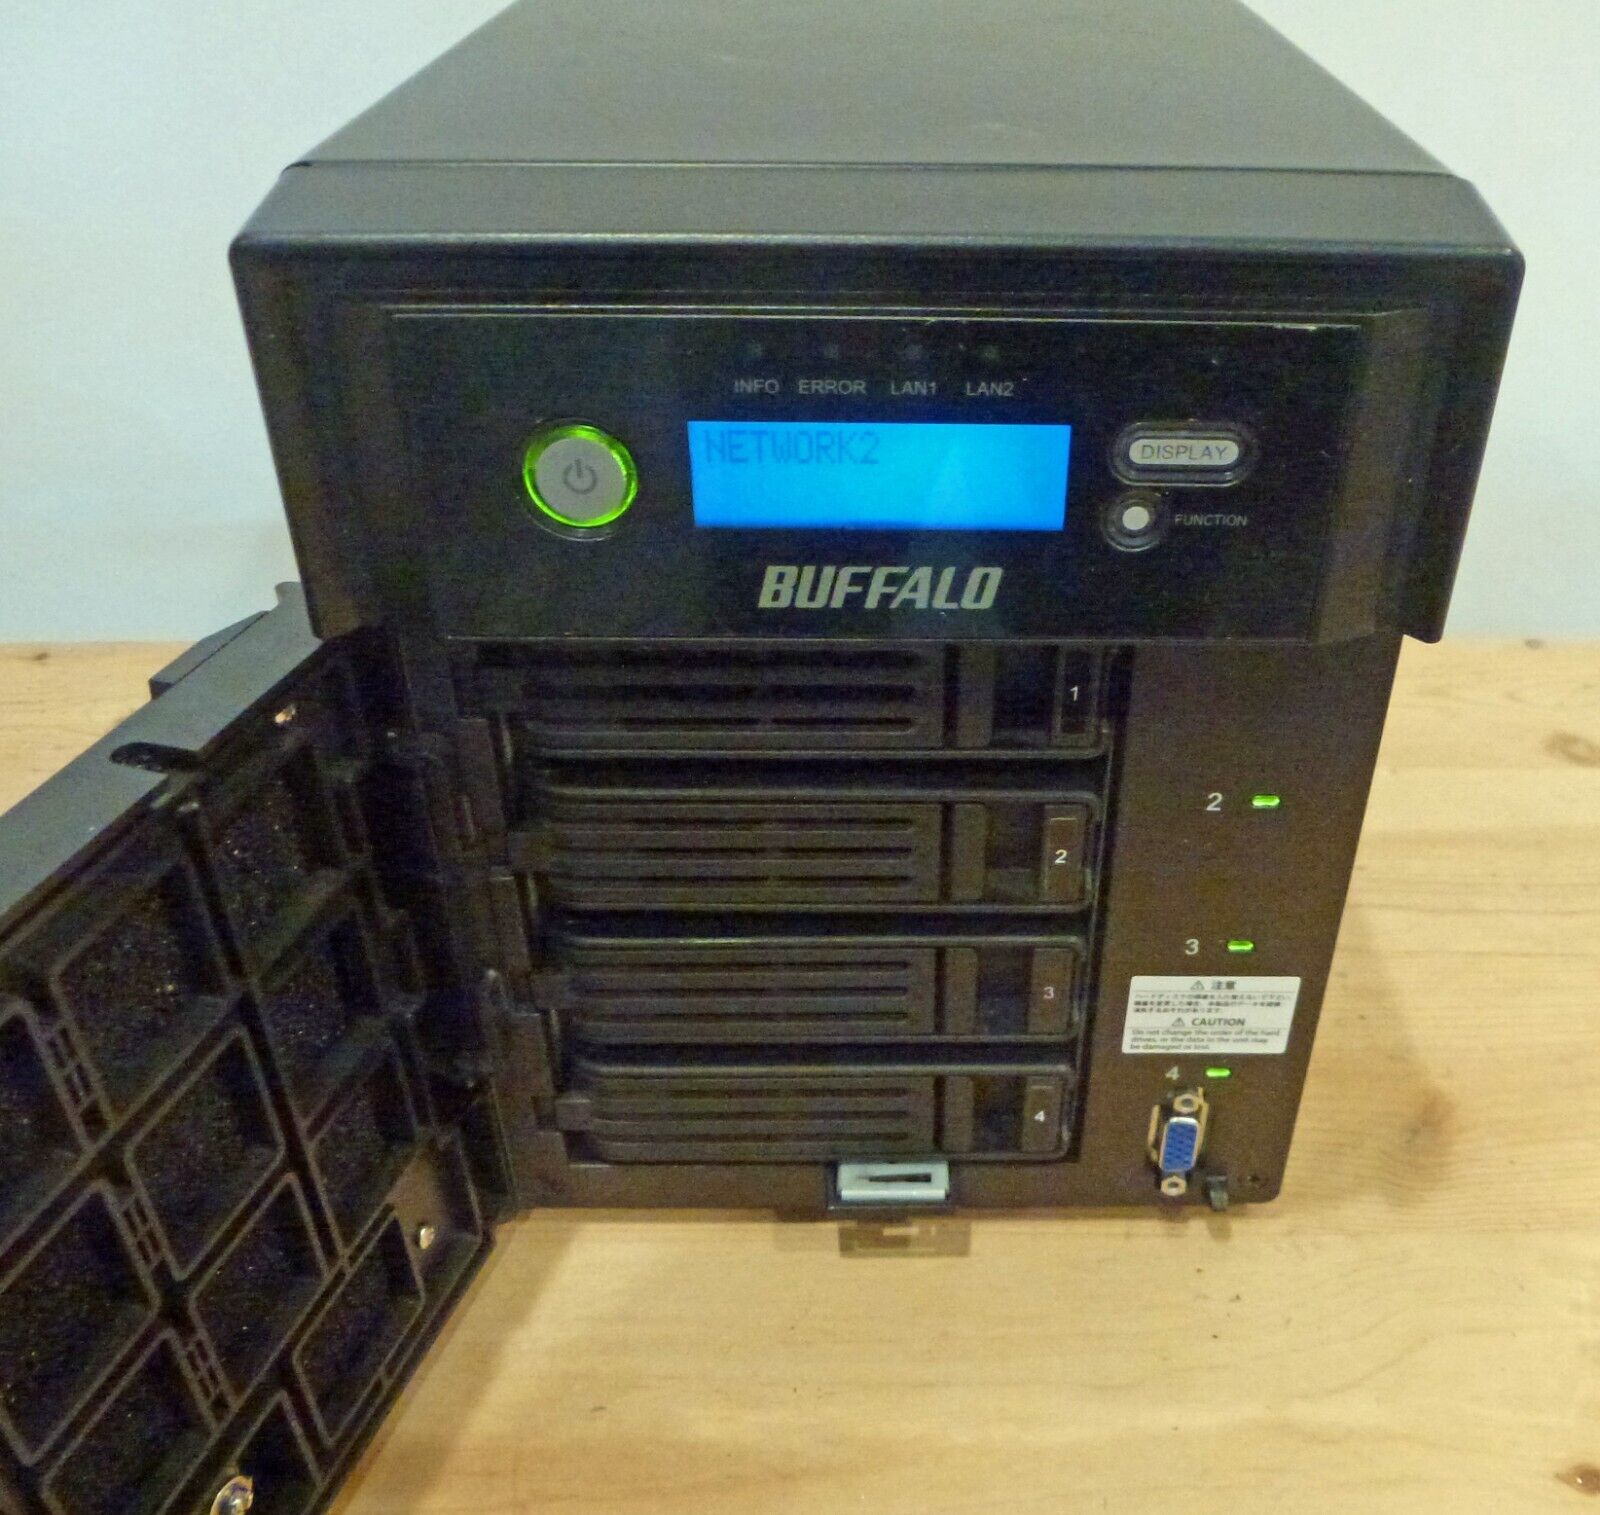 Buffalo Terastation Ts5400d 4 Bay 1 3TB drive included  Excellent Ready to go